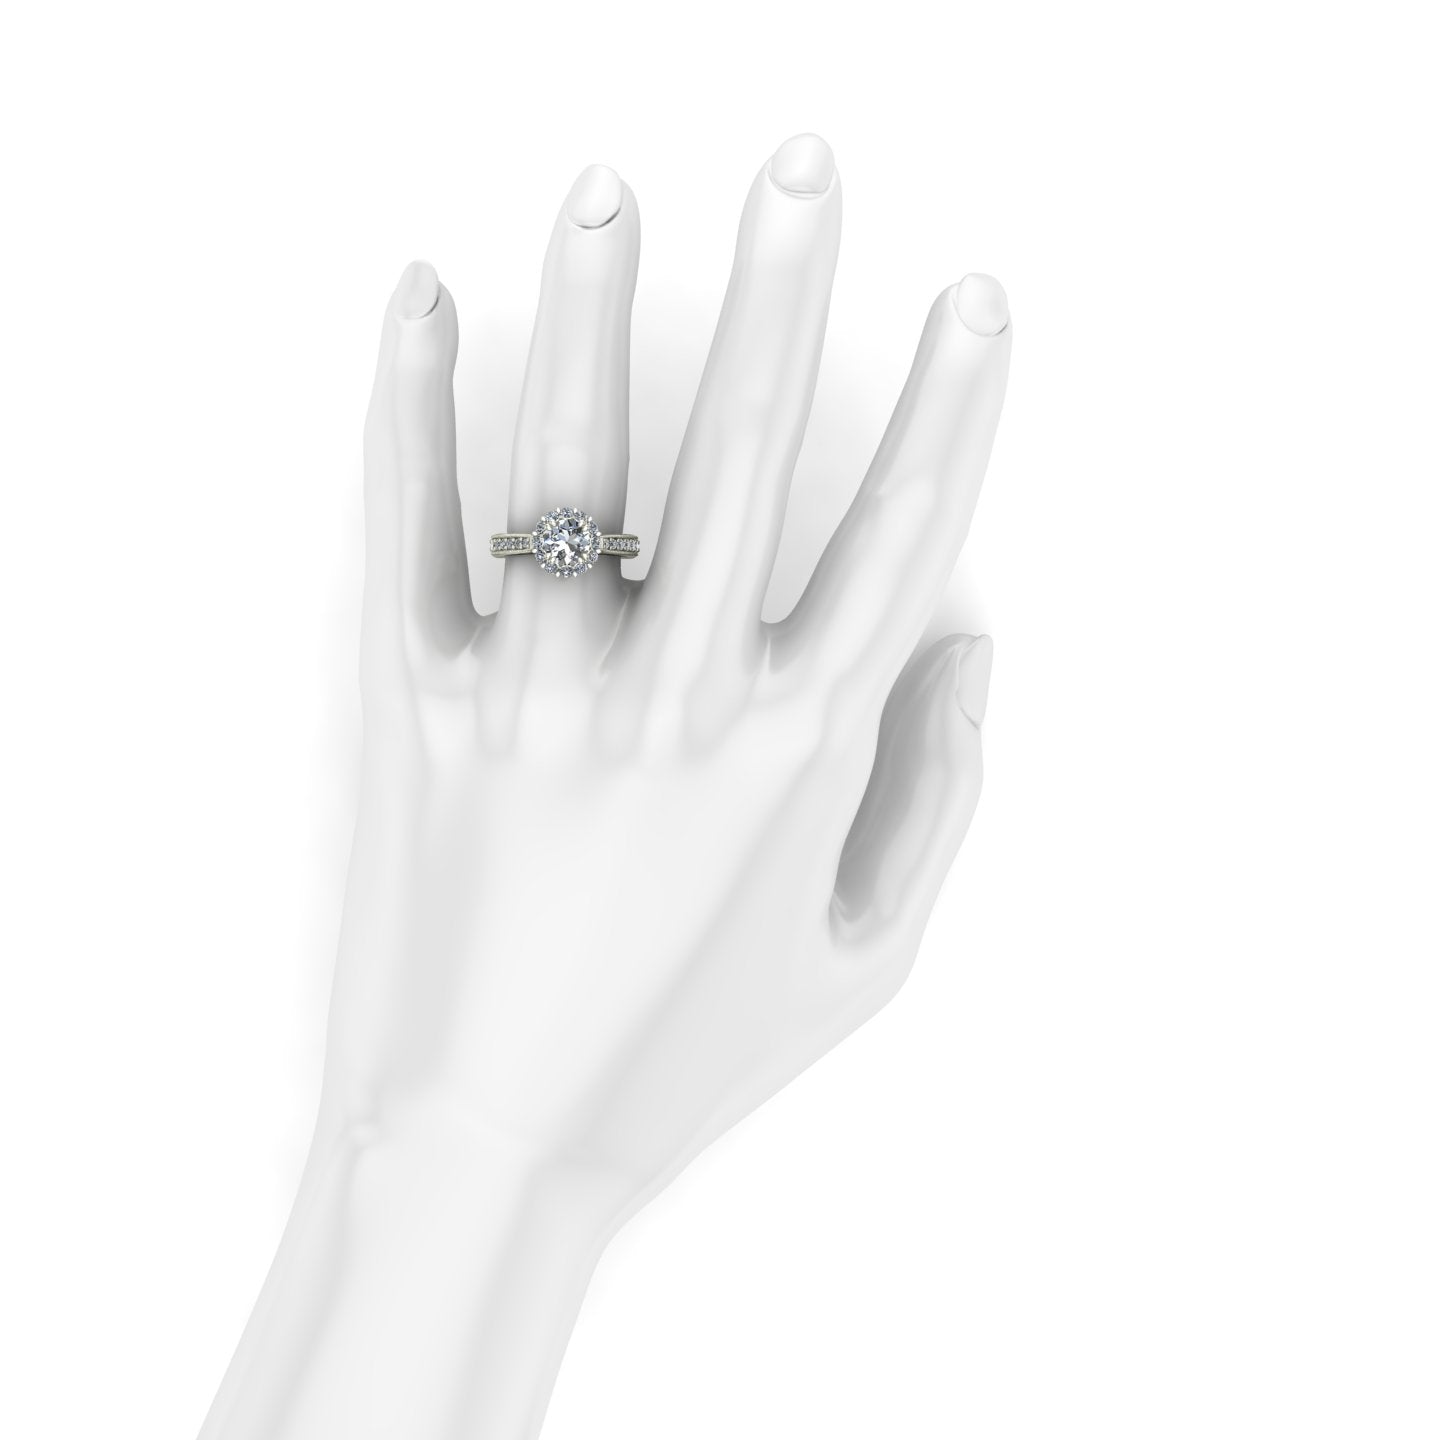 1 ct diamond posey flower halo engagement ring in 14k white gold - Charles Babb Designs - on hand